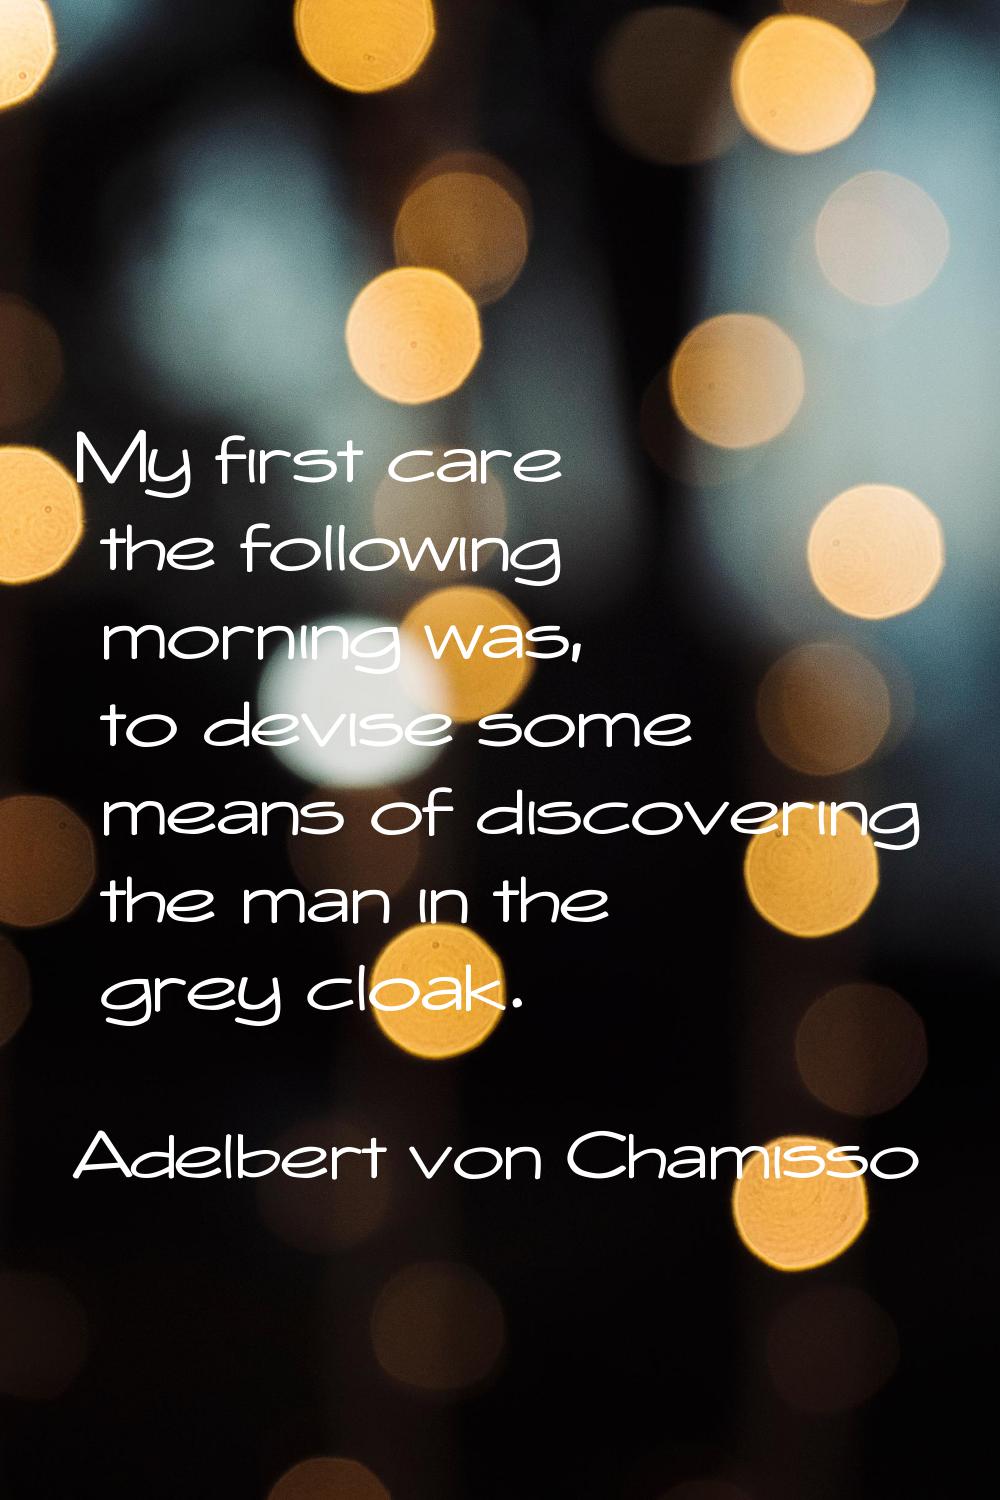 My first care the following morning was, to devise some means of discovering the man in the grey cl